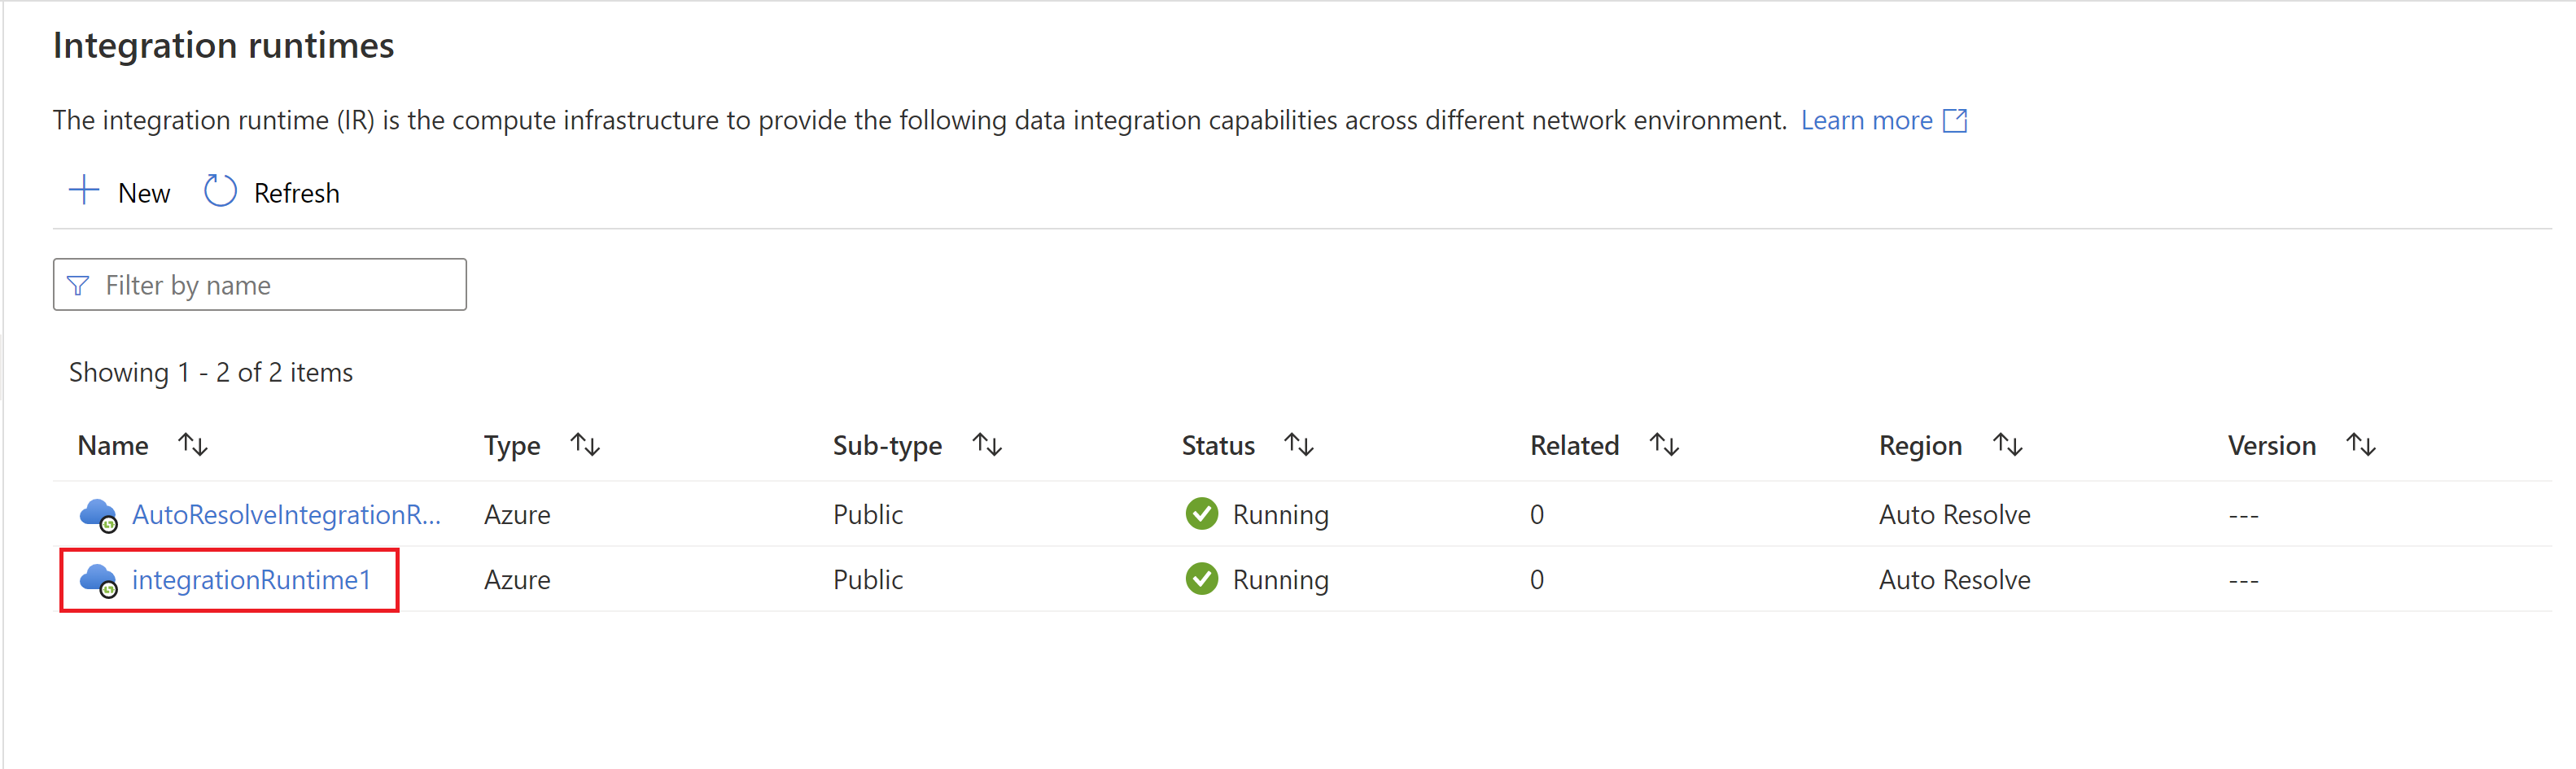 Screenshot showing the Azure integration runtime in the list.